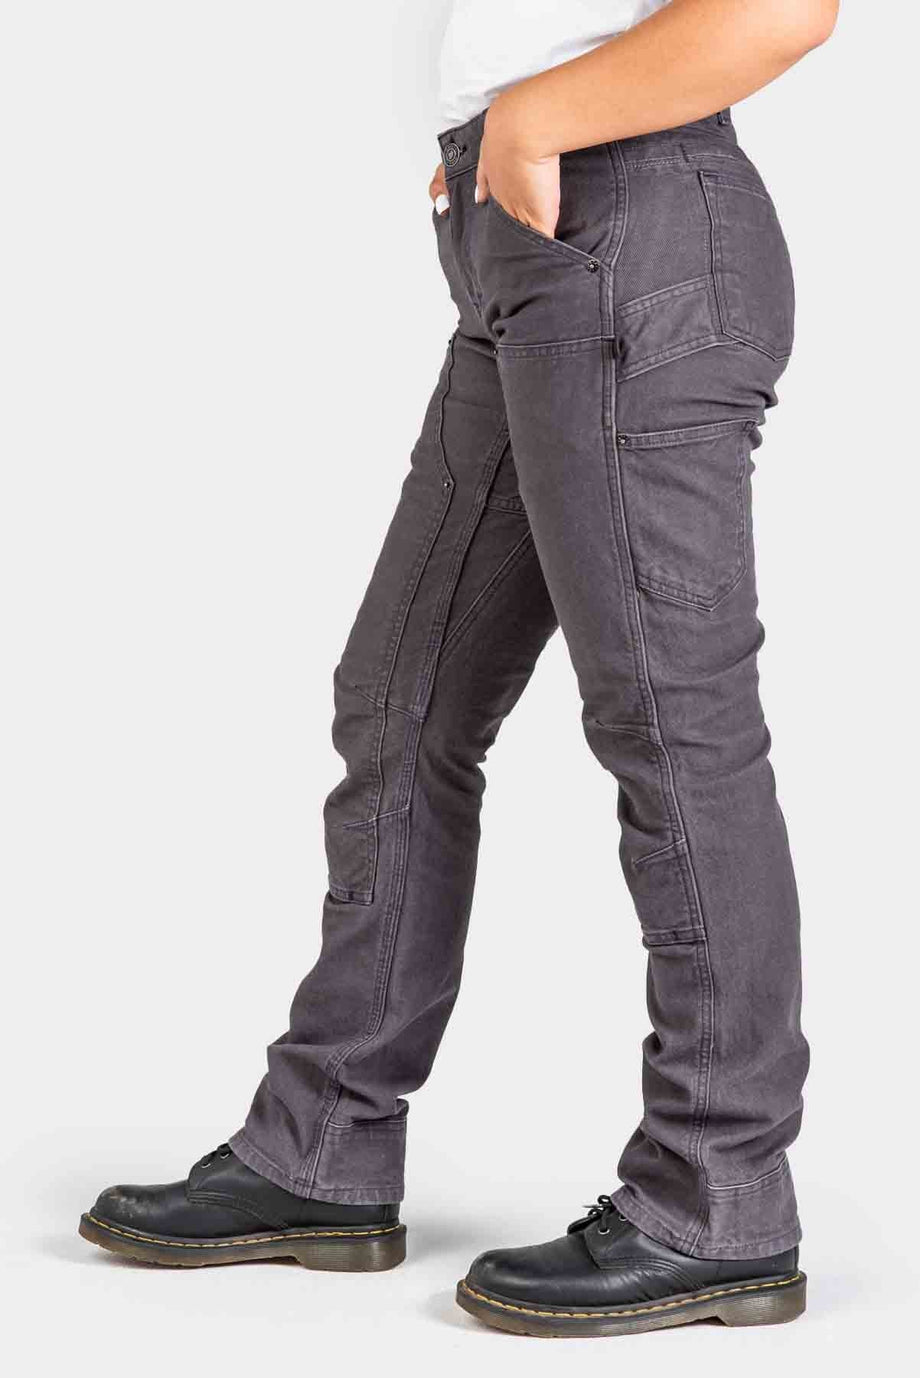 Women's Stretch Woven Cargo Pants - All in Motion Dark Brown